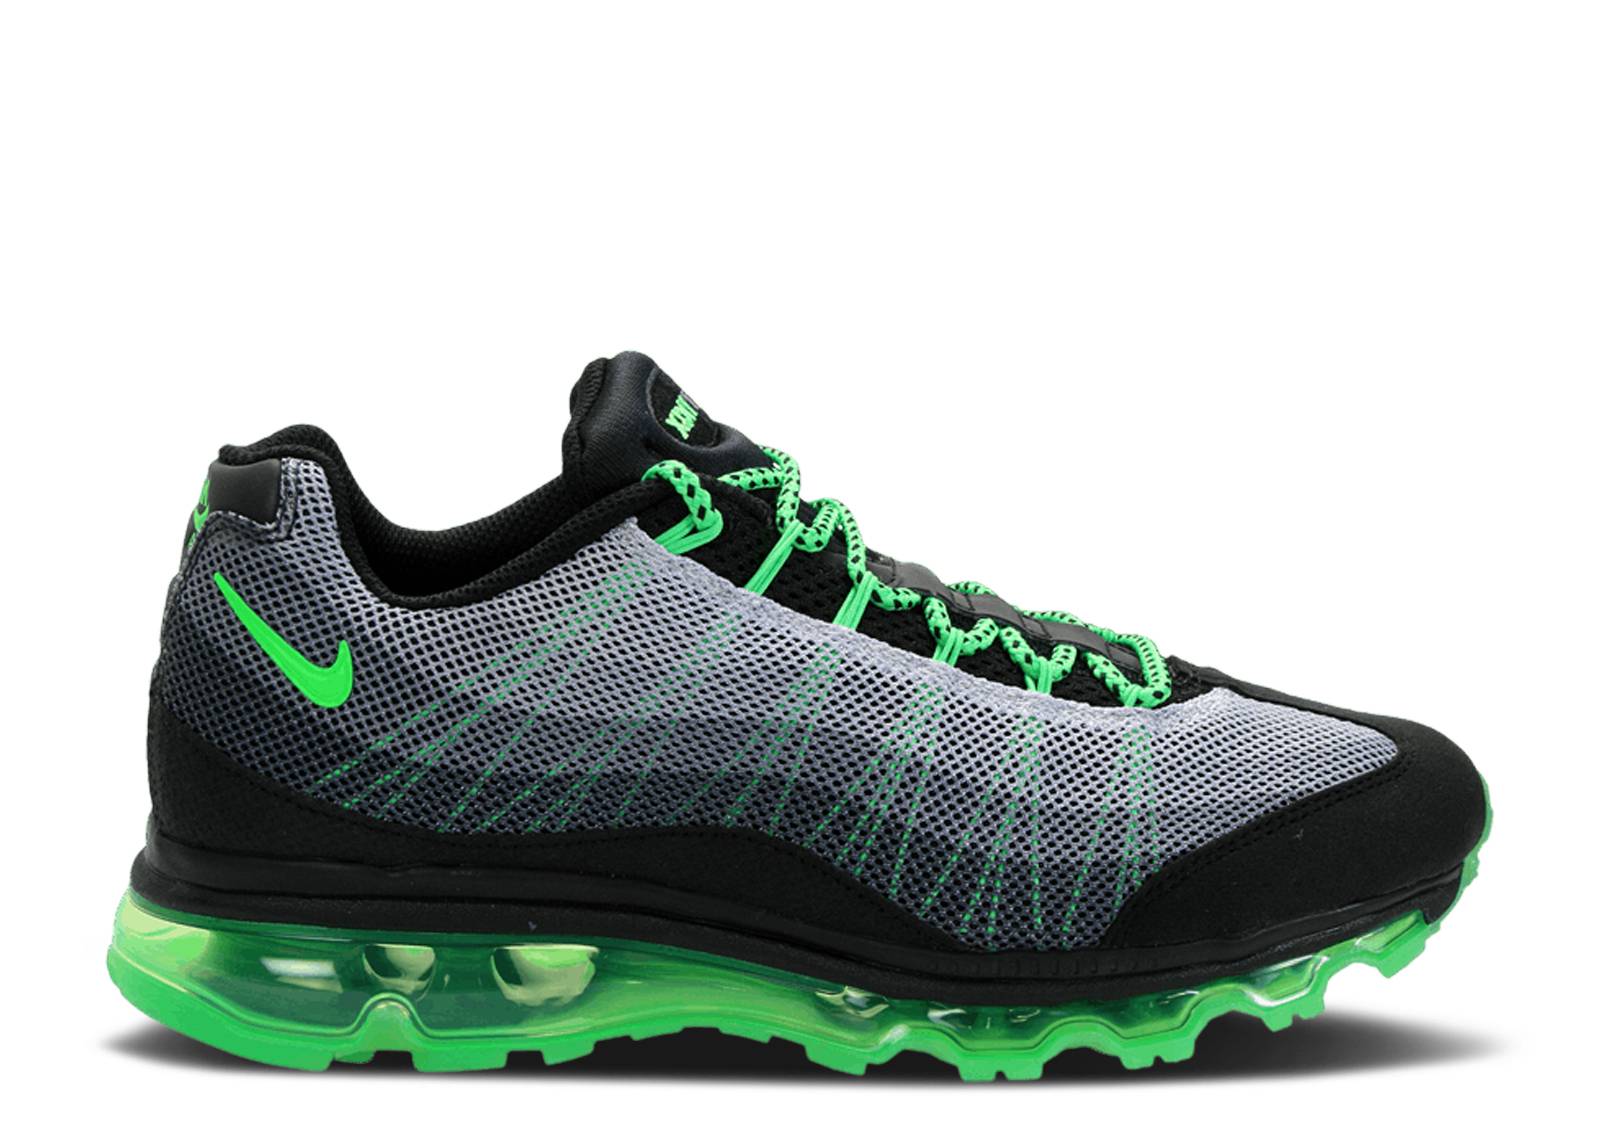 Air Max 95 Dynamic Flywire 'Poison Green'